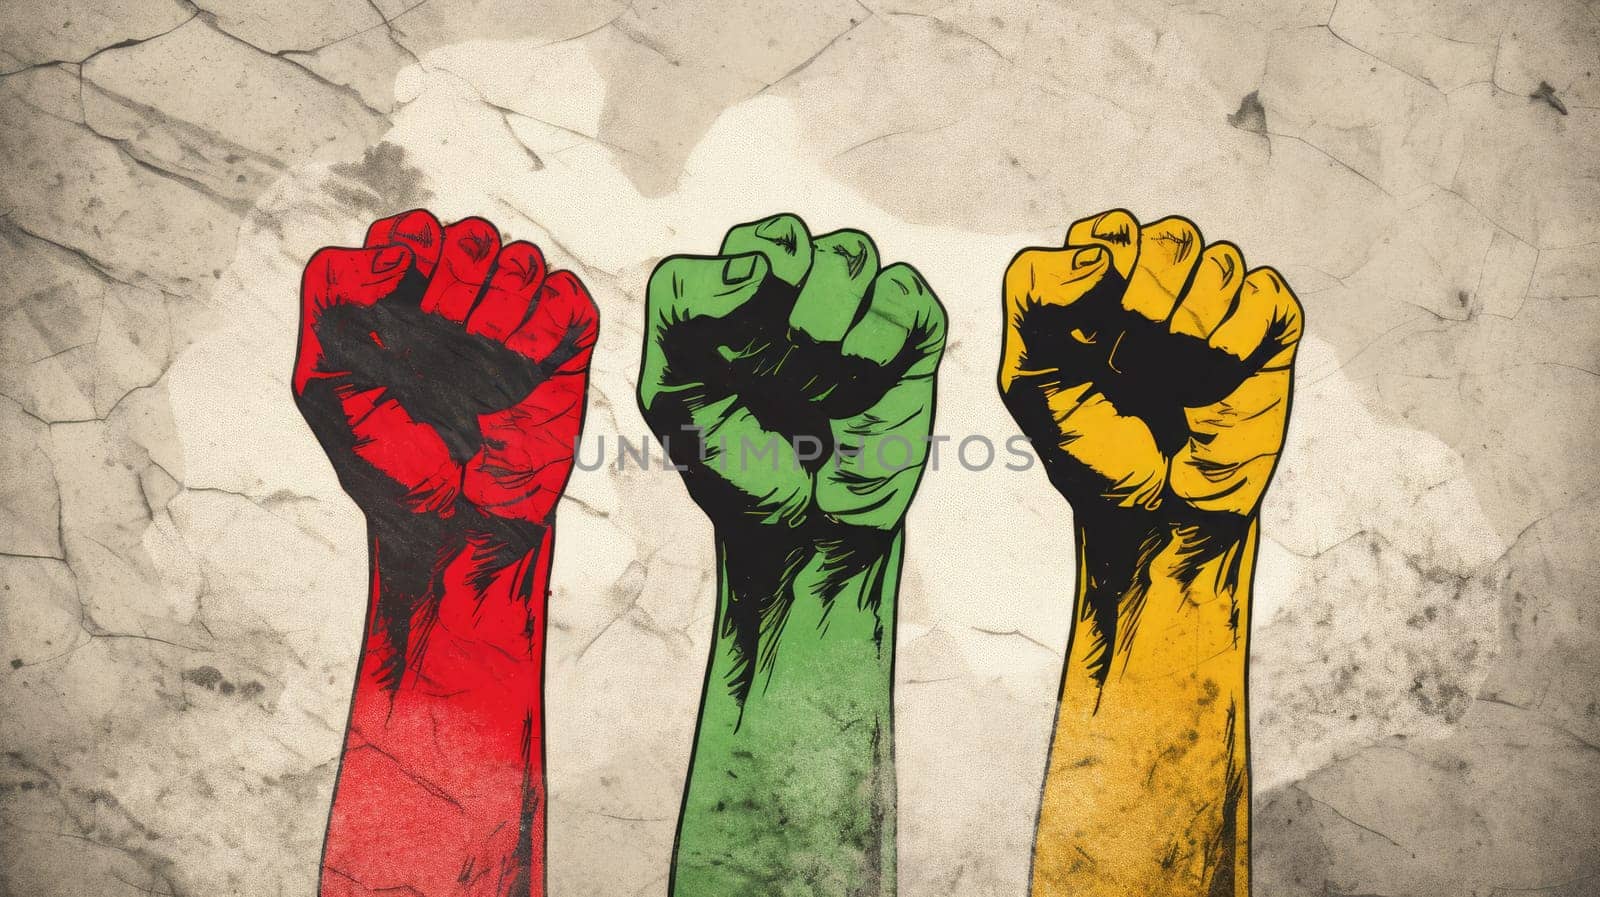 Raised fists drawing on stone wall in the colors yellow, green, and red. Juneteenth Freedom and African liberation day. Black life matters. Black history month